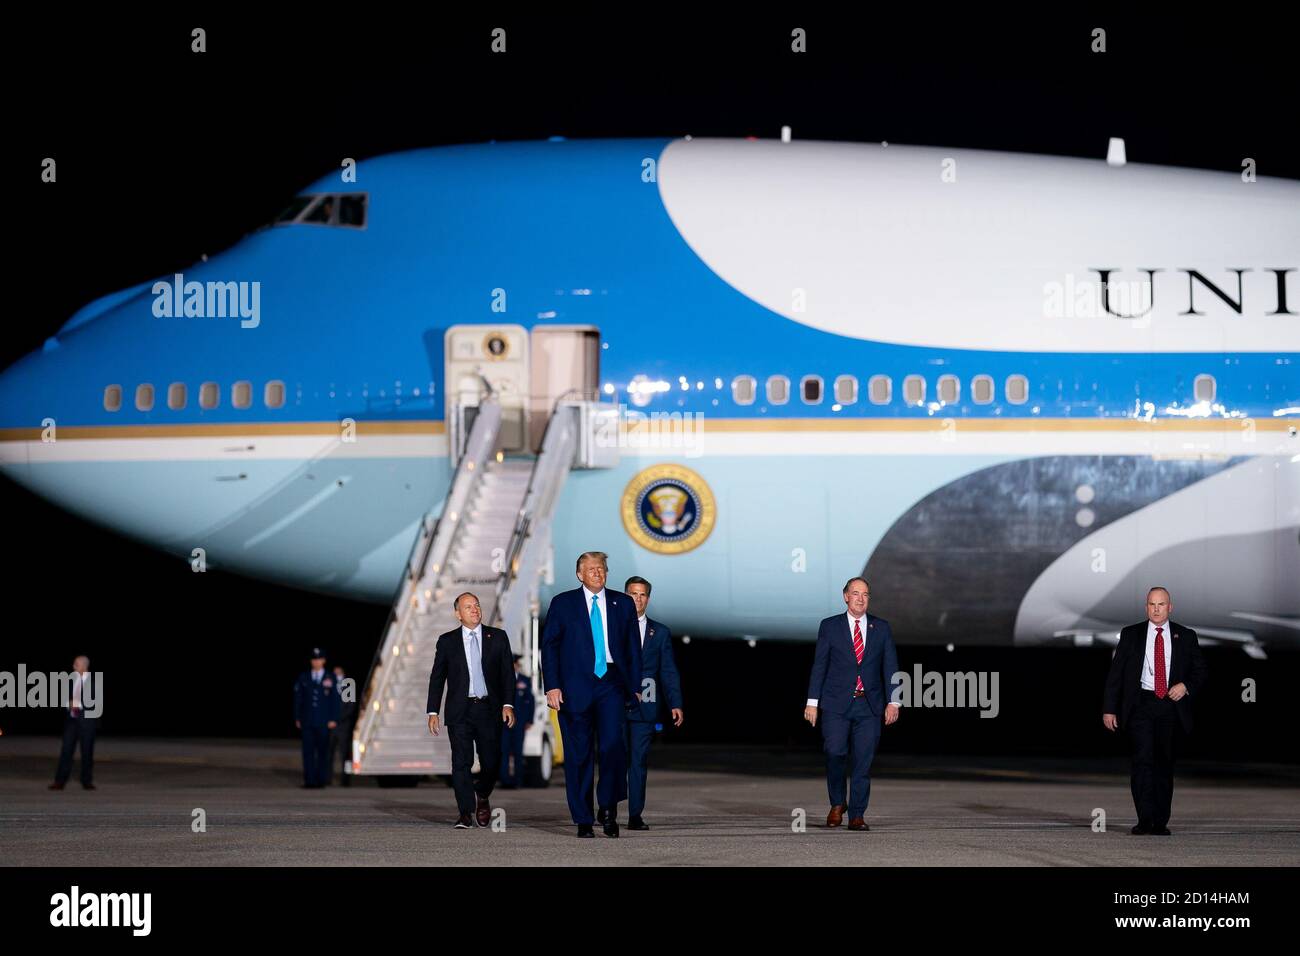 President Trump Travels to PA. President Donald J. Trump is joined by members of the Pennsylvania Congressional delegation as he walks across the tarmac after disembarking Air Force One at Harrisburg International Airport in Harrisburg, Pa. Saturday, Sept. 26, 2020, where they were greeted by guests and supporters. Stock Photo